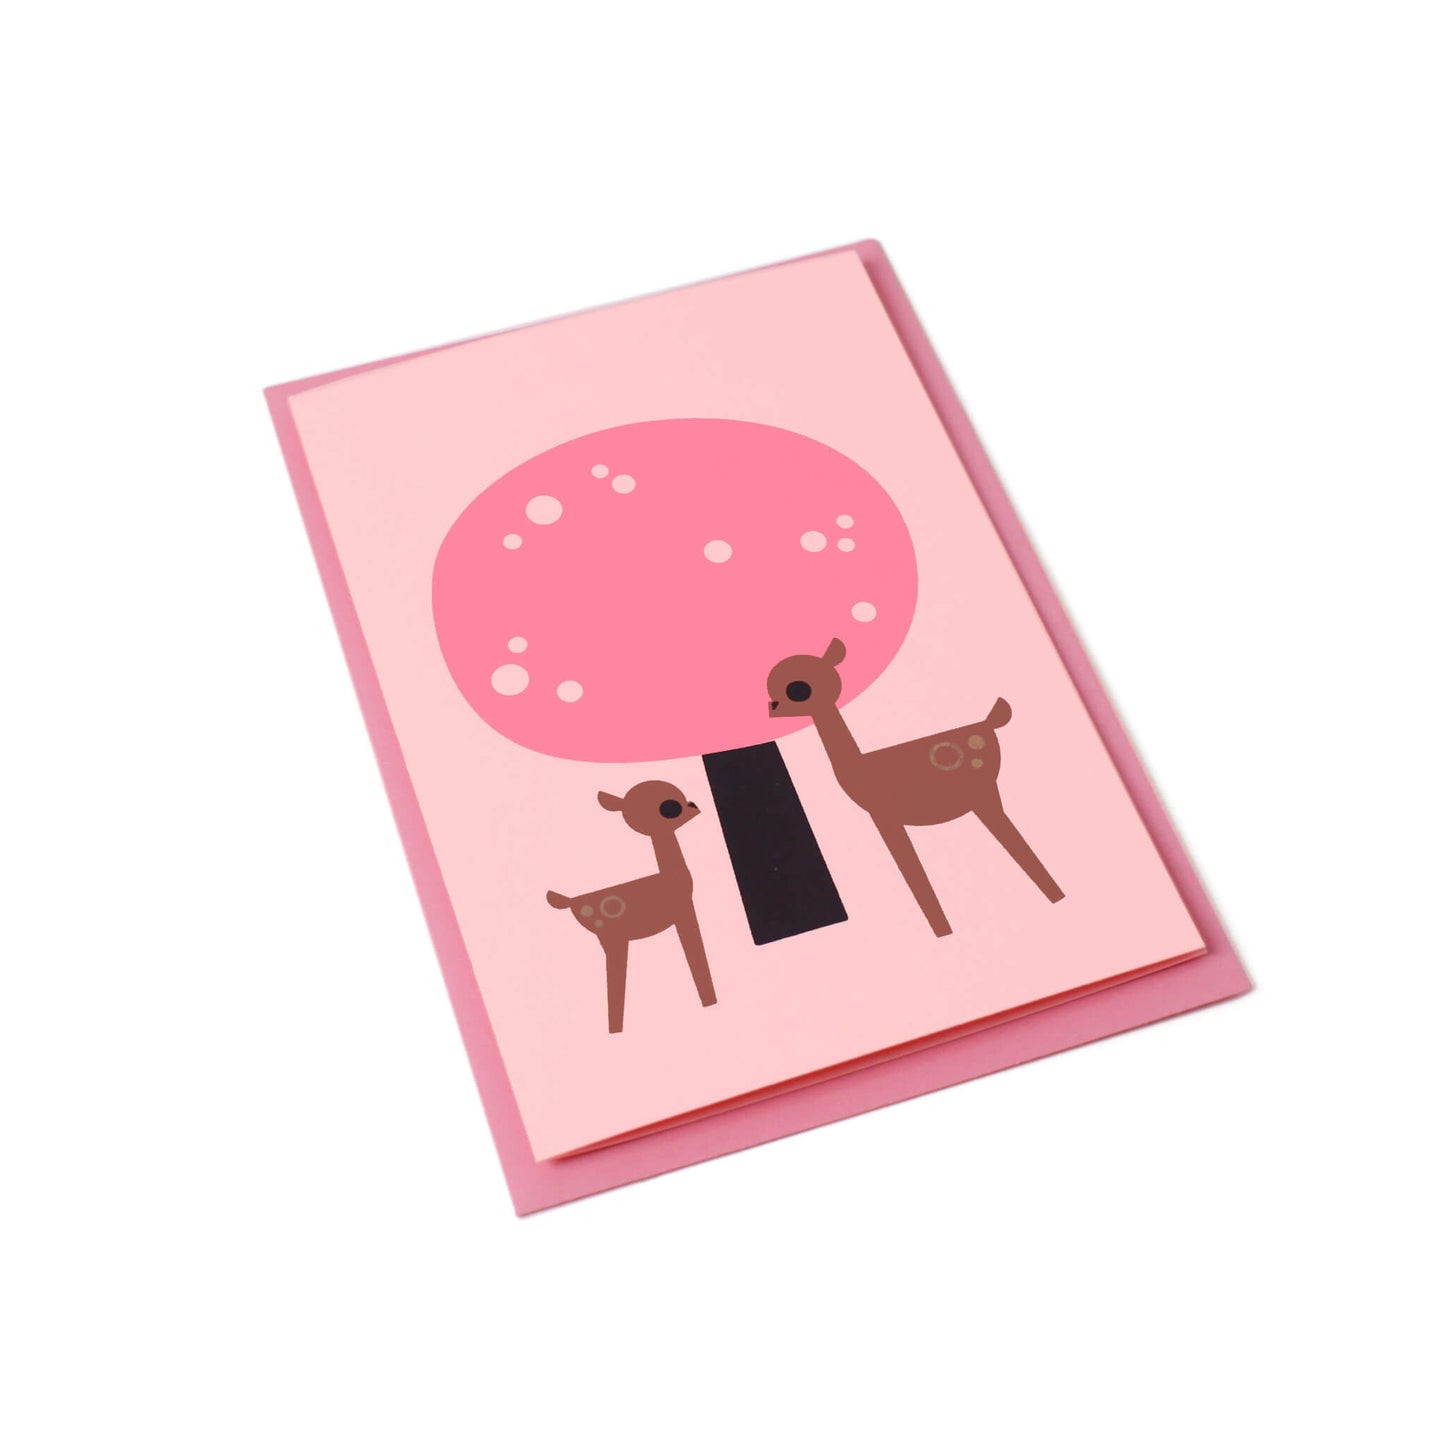 Pink greeting card with art of a cherry blossom tree and deer plus a pink envelope.